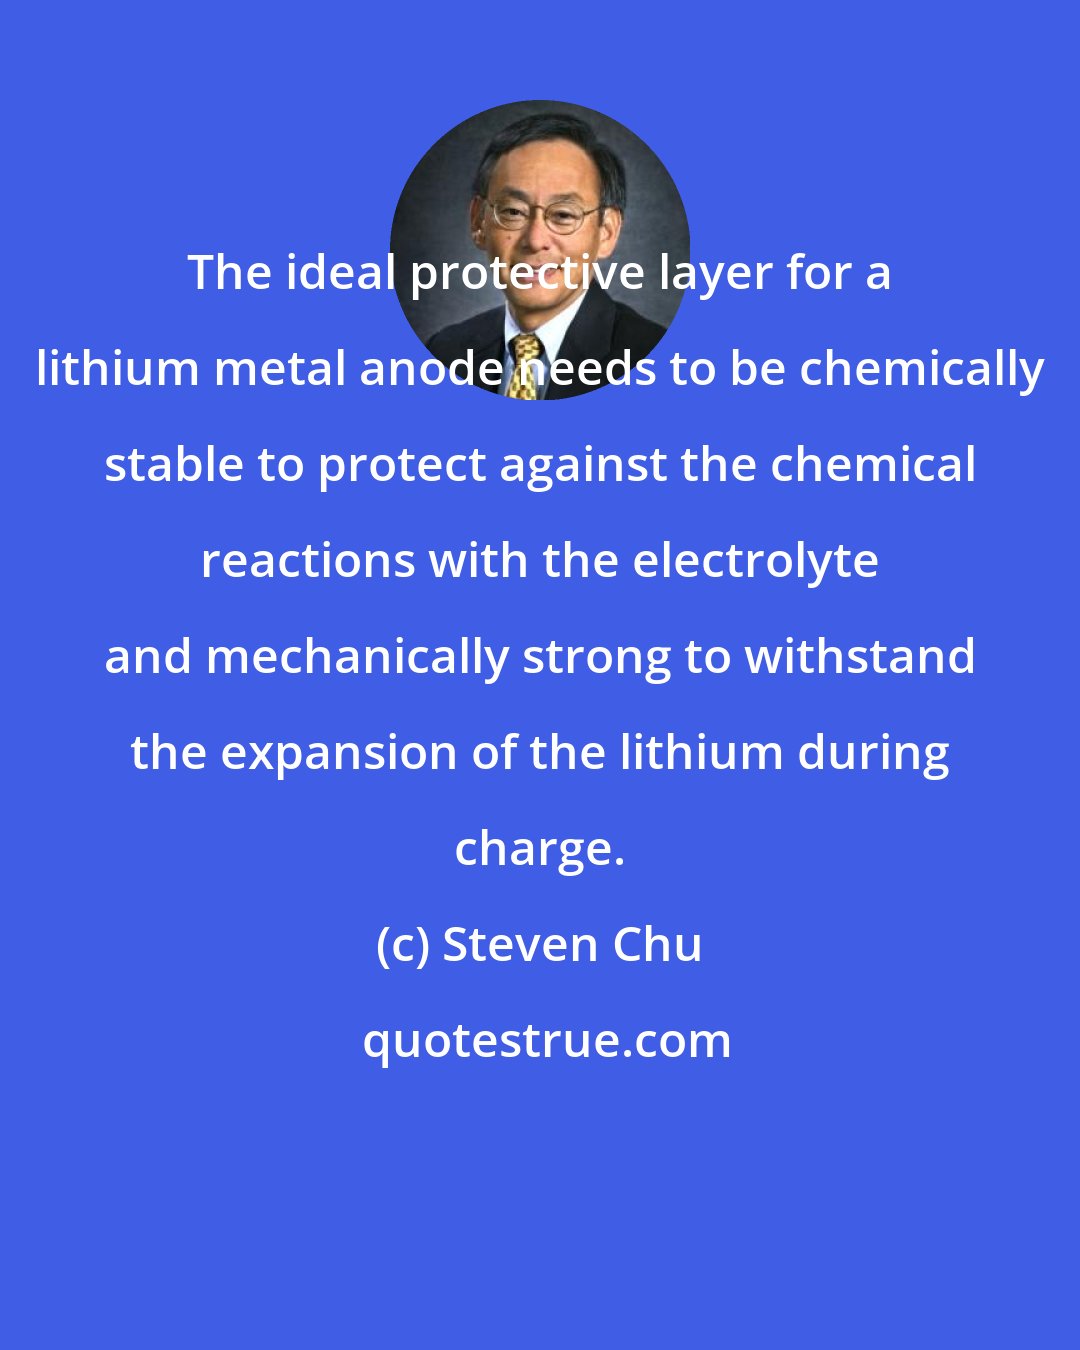 Steven Chu: The ideal protective layer for a lithium metal anode needs to be chemically stable to protect against the chemical reactions with the electrolyte and mechanically strong to withstand the expansion of the lithium during charge.